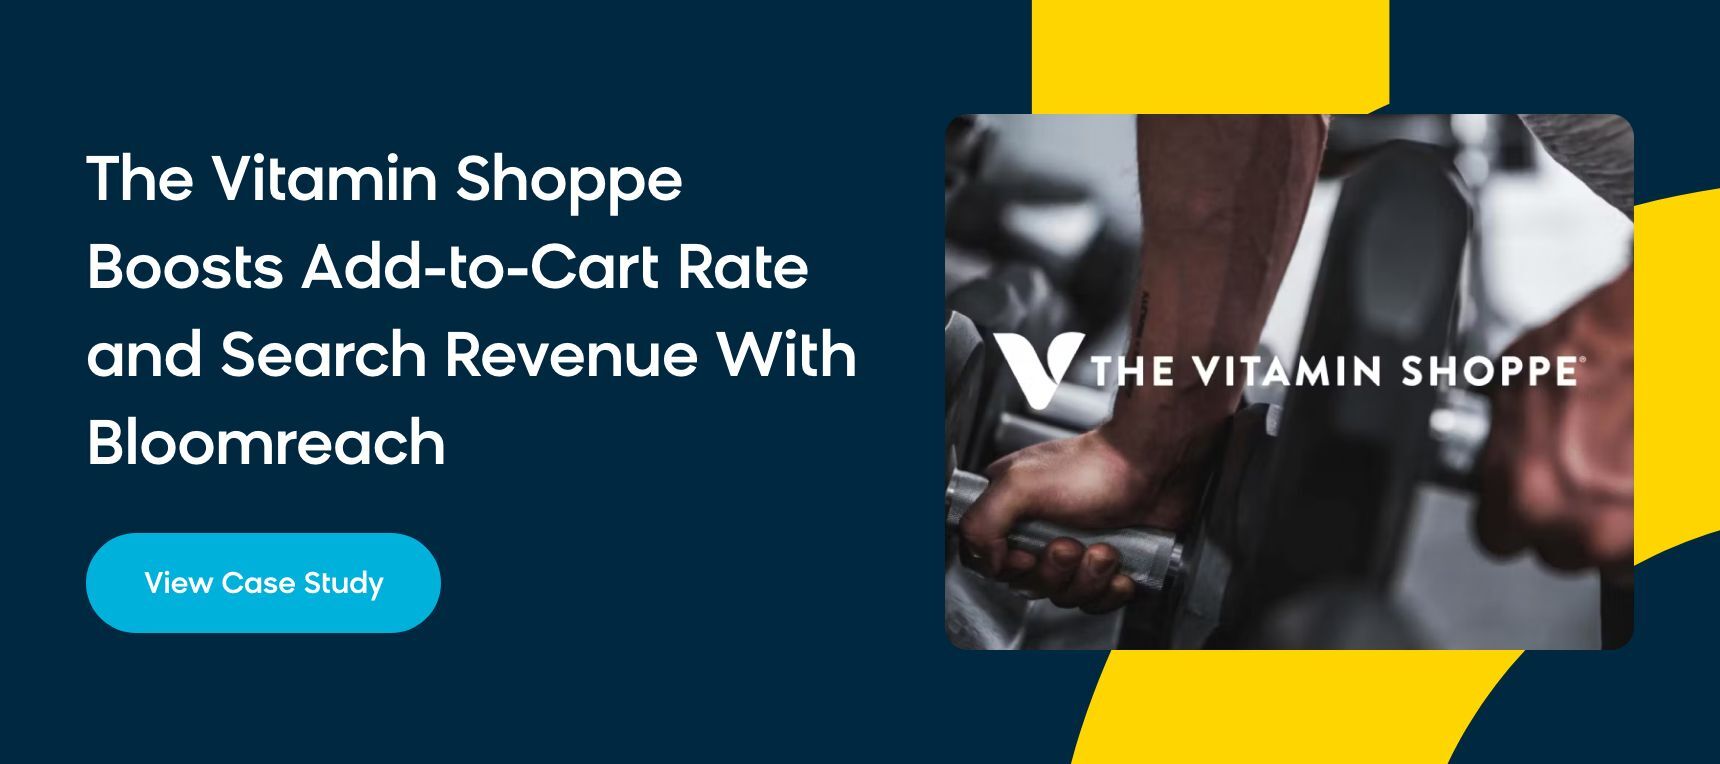 The Vitamin Shoppe boosts add-to-cart rate and search revenue with Bloomreach